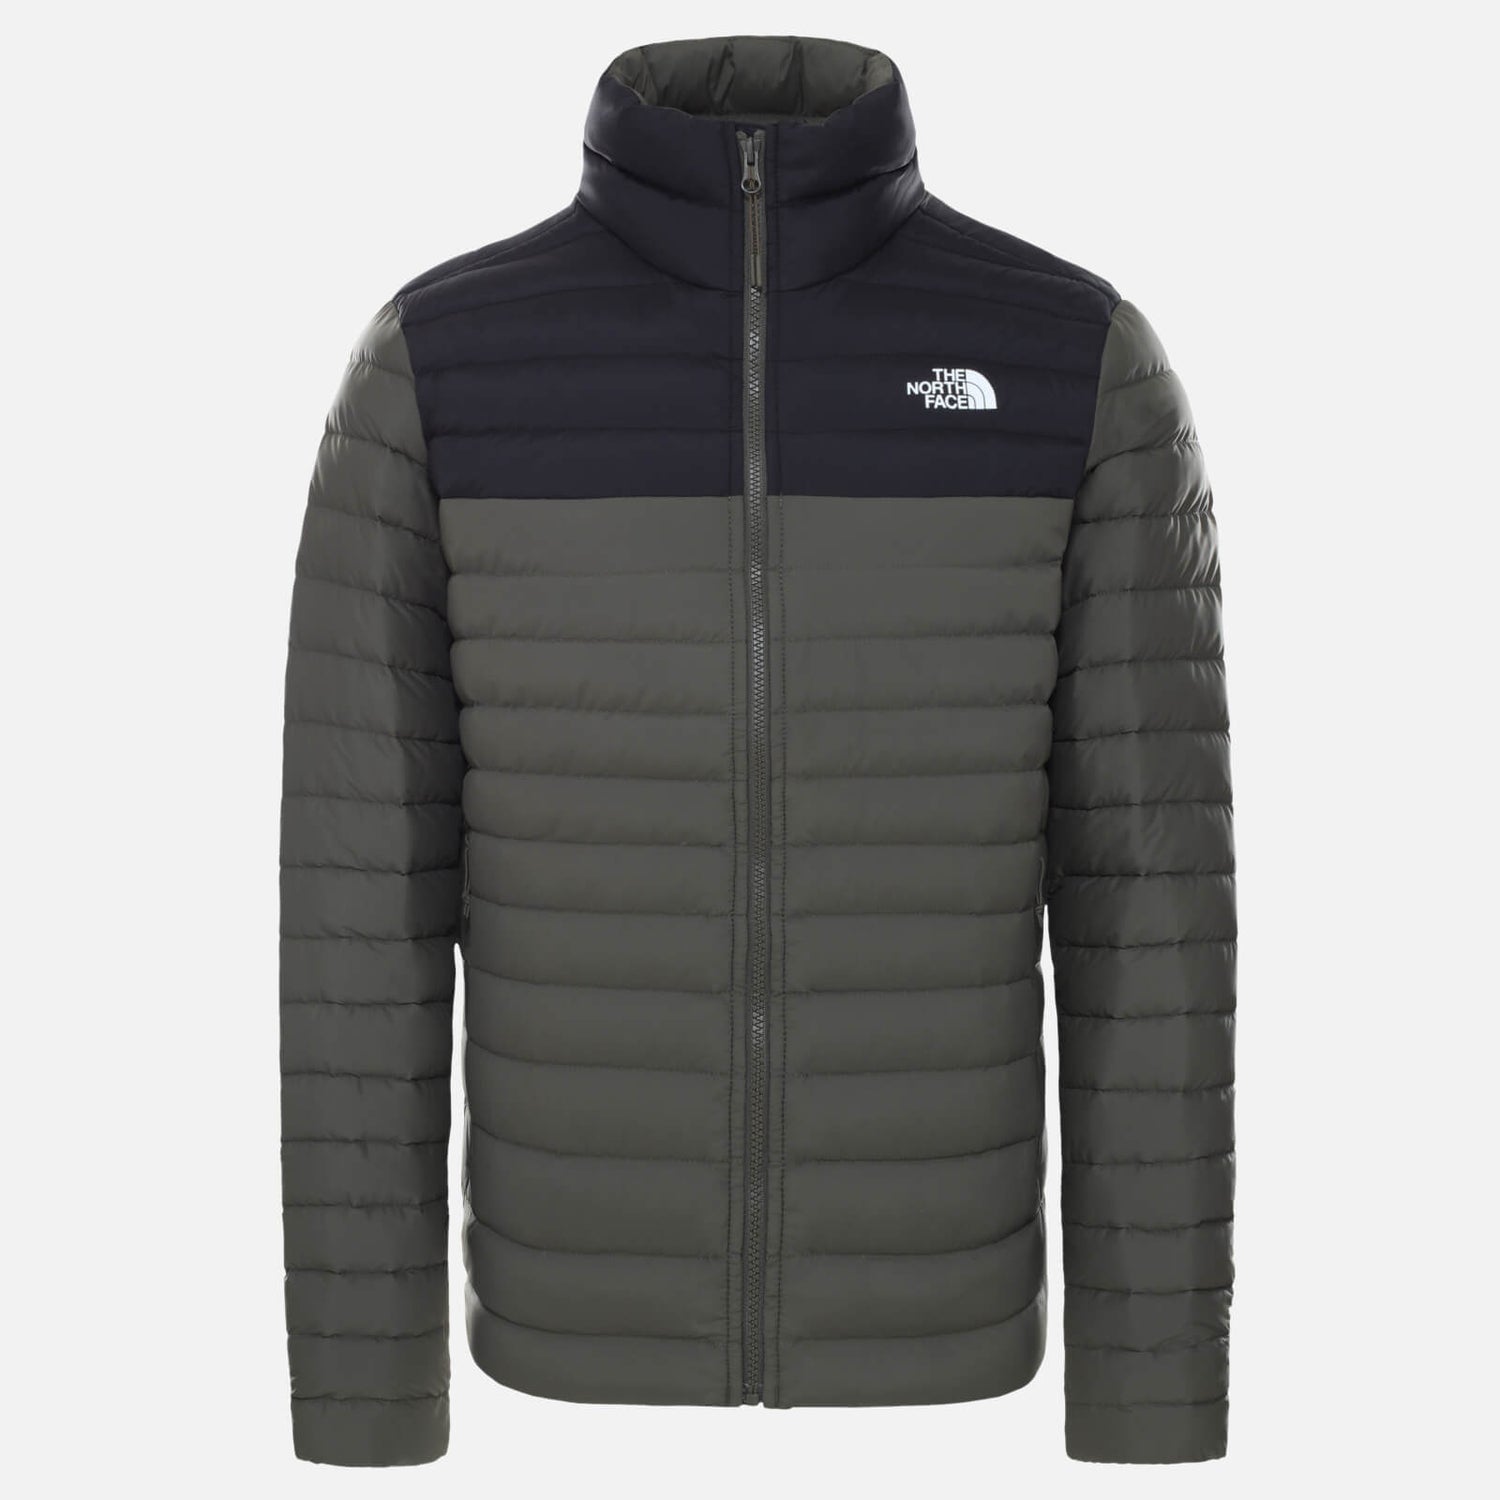 The North Face Men's Stretch Down Jacket - New Taupe Green/TNF Black - S